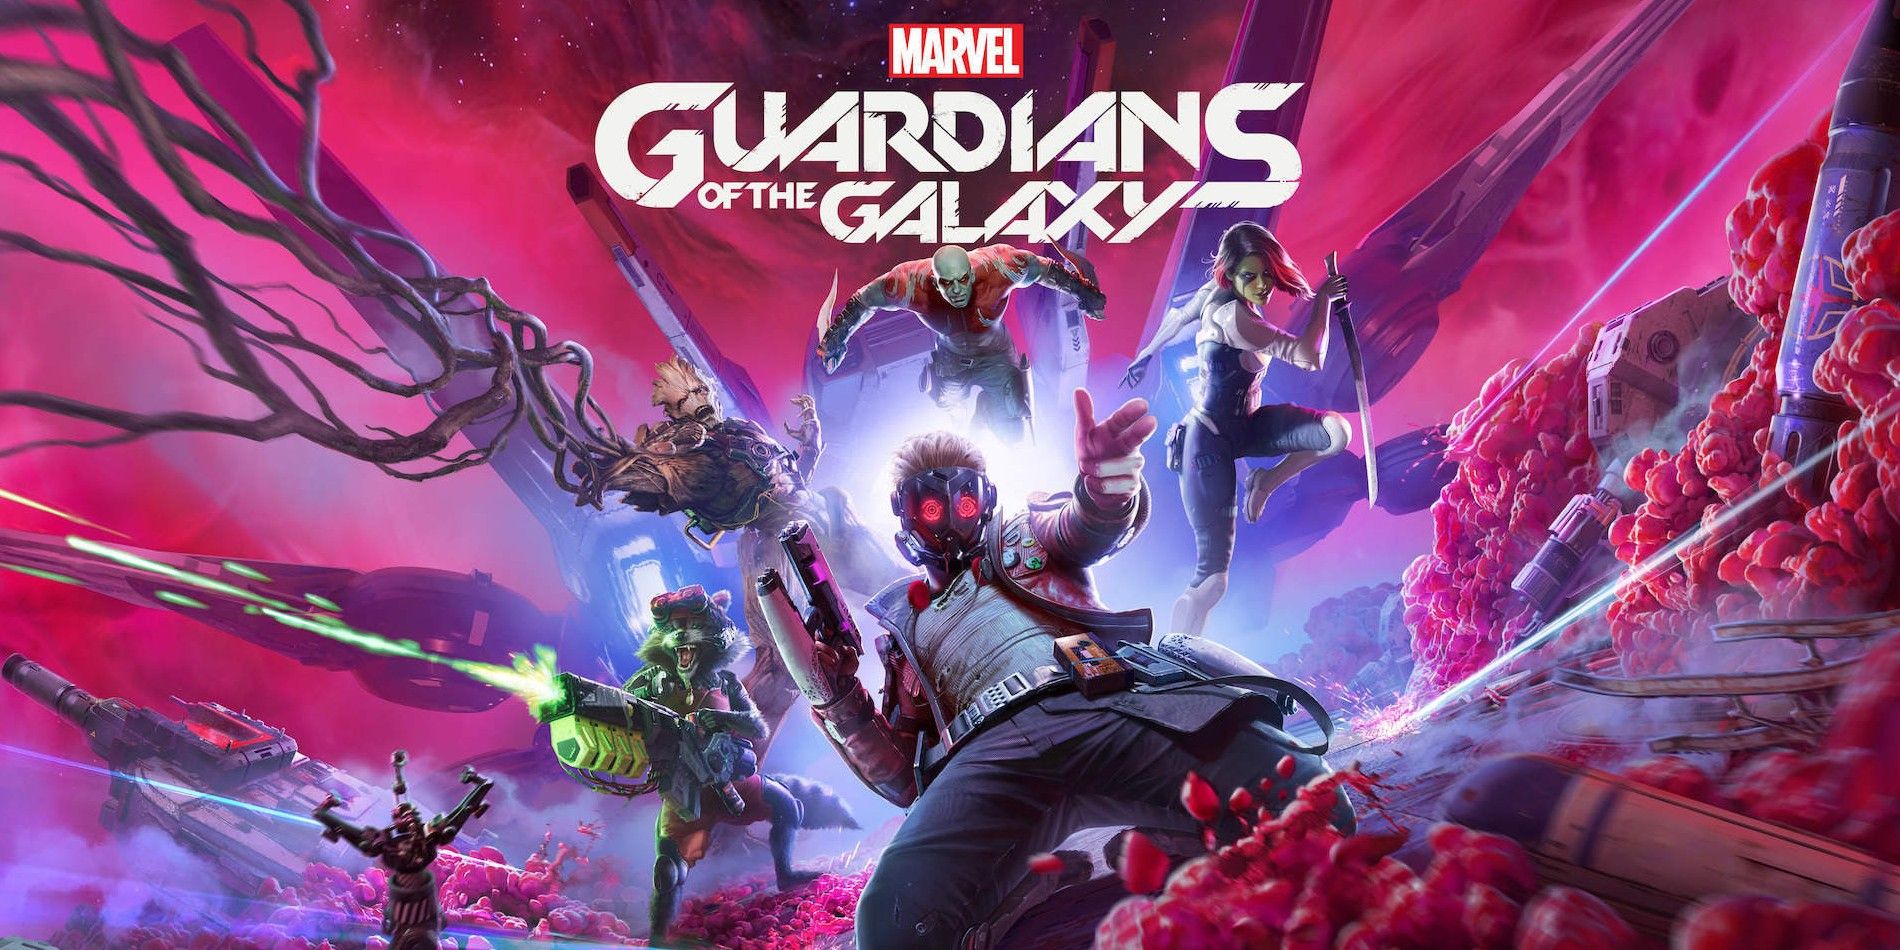 Every Upcoming Marvel Video Game Confirmed In Development - Guardians of the Galaxy